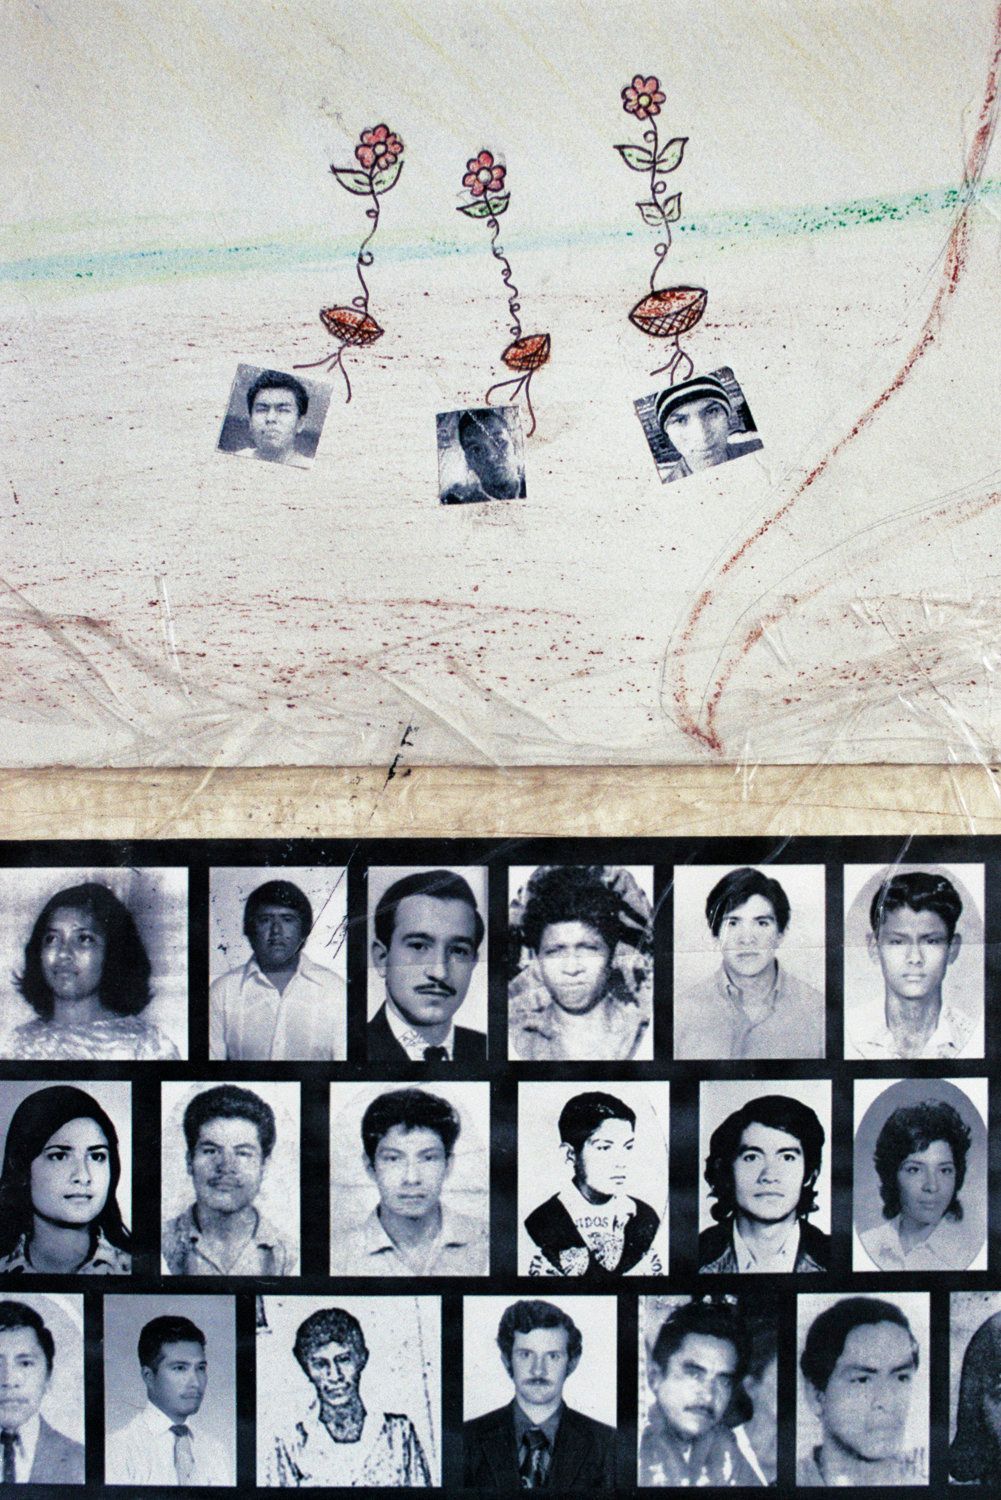 Drawings of Julio César Ramírez, Daniel Solís and Julio César Mondragón, the three Ayotzinapa students who were murdered during the Iguala attacks, on a poster at the Ayotzinapa Normal School on March 15, 2015. Below them, a poster shows images of Mexicans who disappeared during the "dirty war," a period of intense state repression, enforced disappearances and extrajudicial executions between the 1960s and the 1980s. 